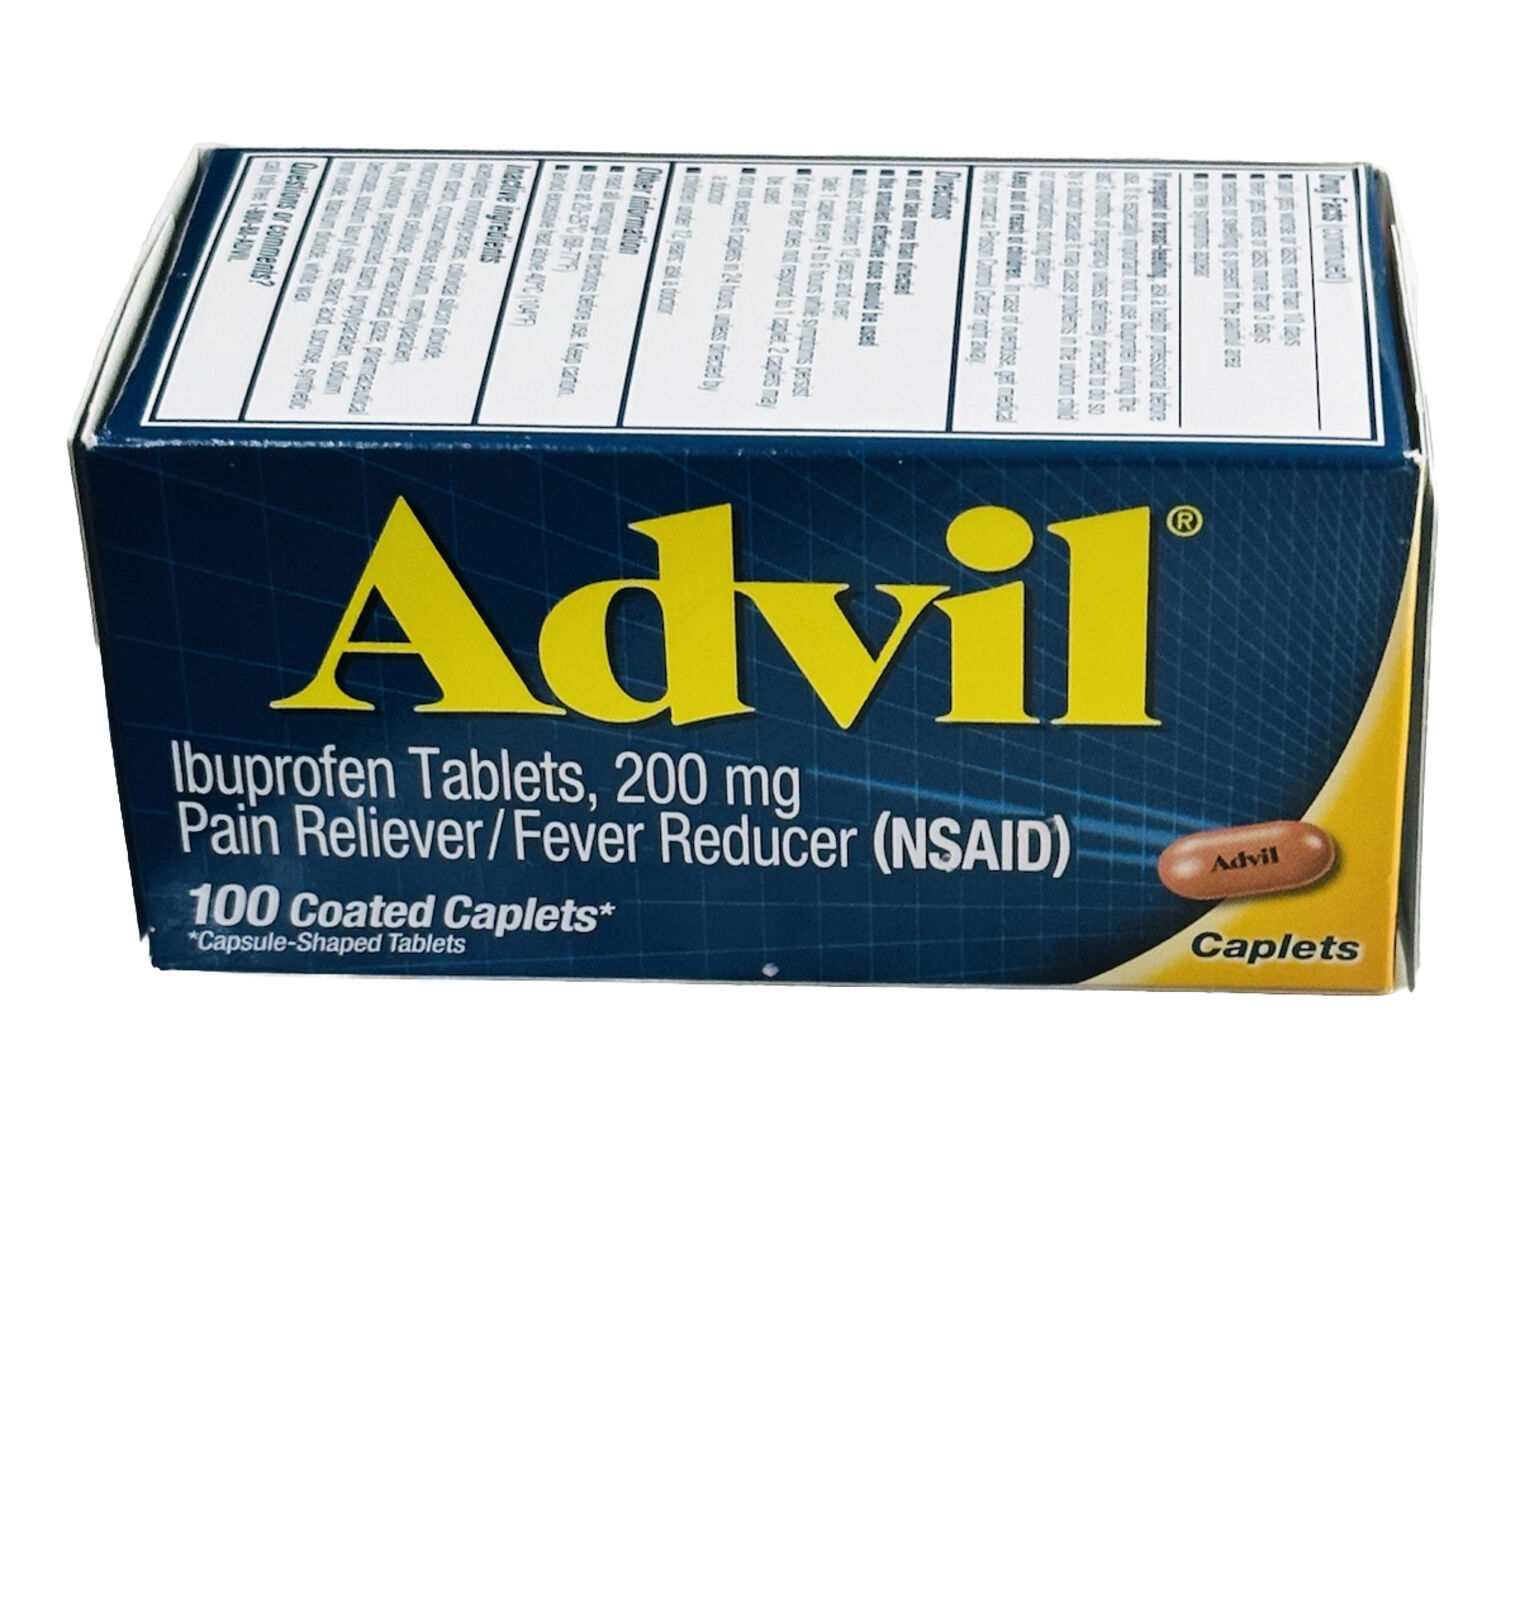 Primary image for Advil Pain Reliever Fever Reducer Ibuprofen 200 mg (NSAID)Coated Caplets 100ct